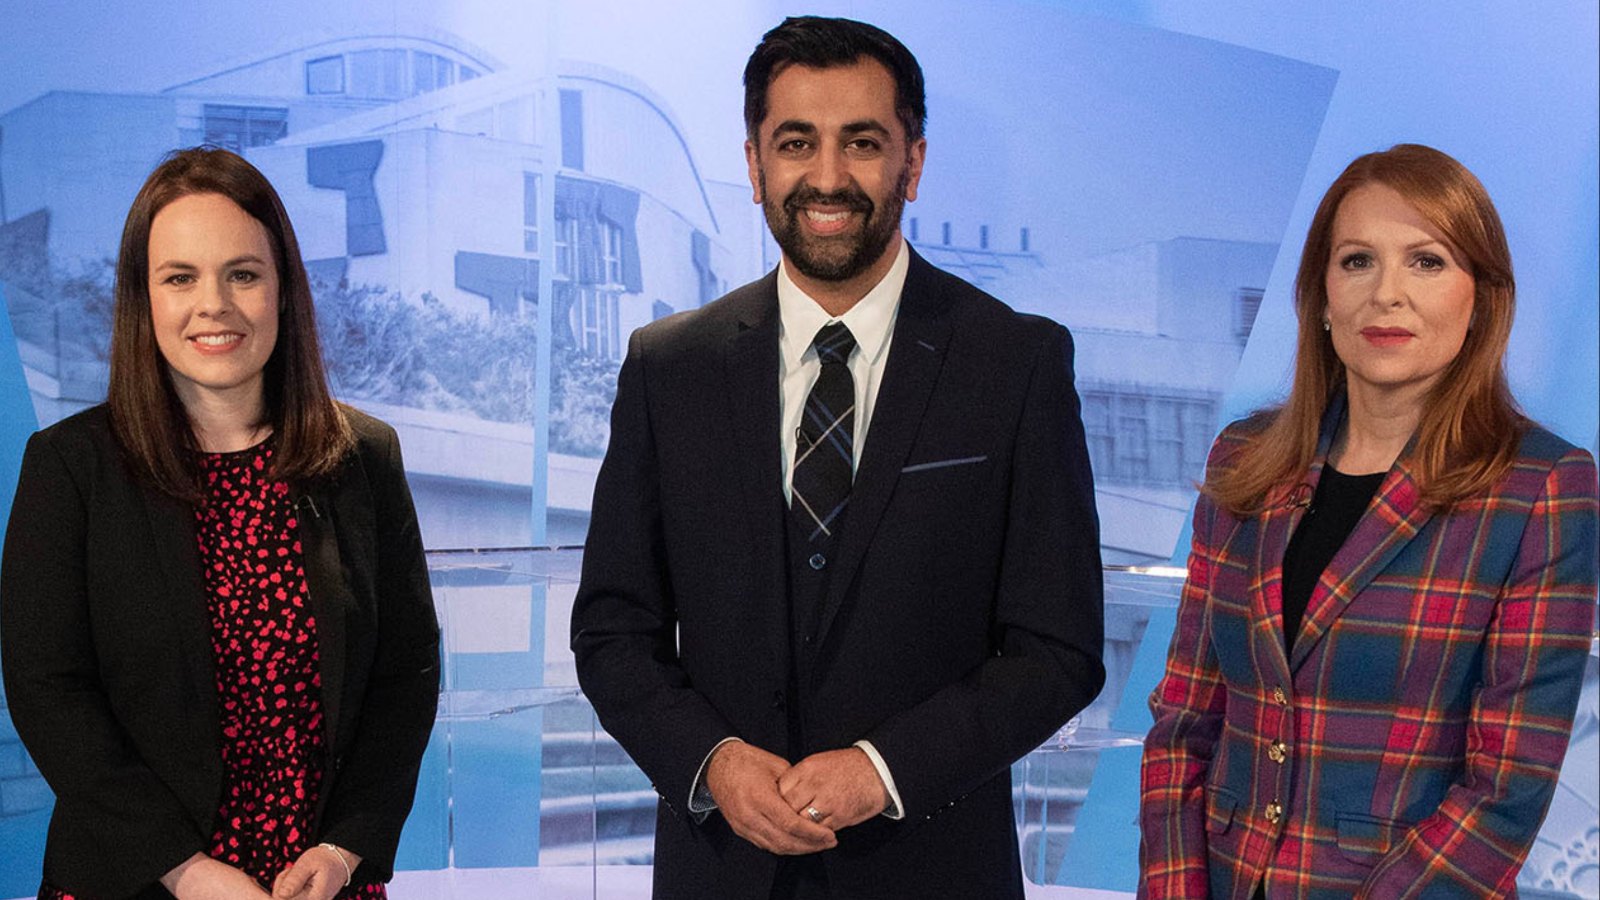 either Kate Forbes, Humza Yousaf or Ash Regan will become the new leader of the SNP.